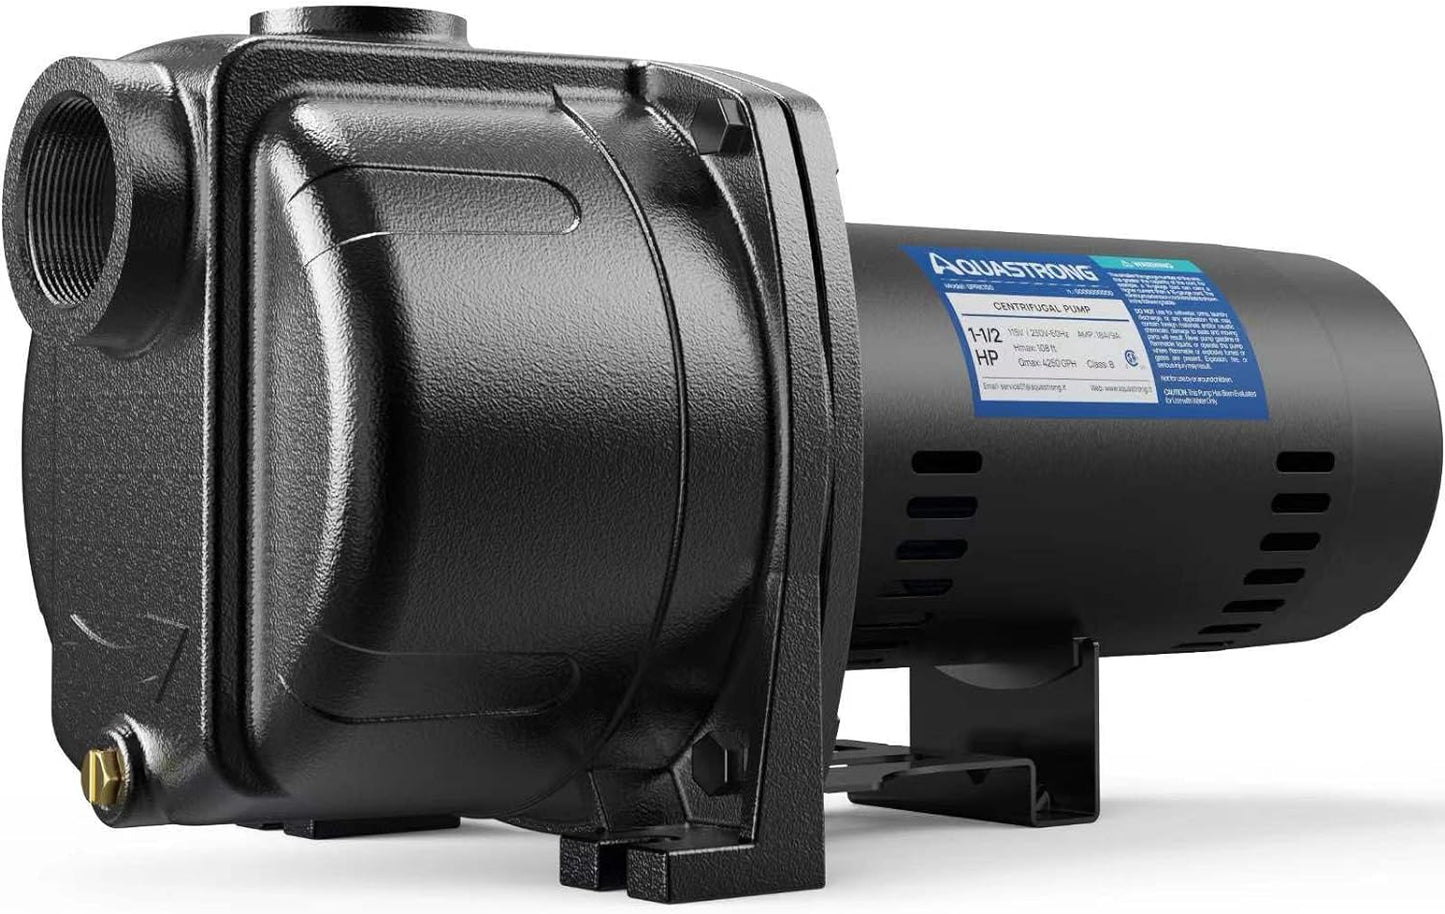 AQUASTRONG 1.5 HP Centrifugal/Jet Pump, 4250 GPH, 115/230V, Durable Cast Iron Pump for Lawn Sprinkler and Irrigation